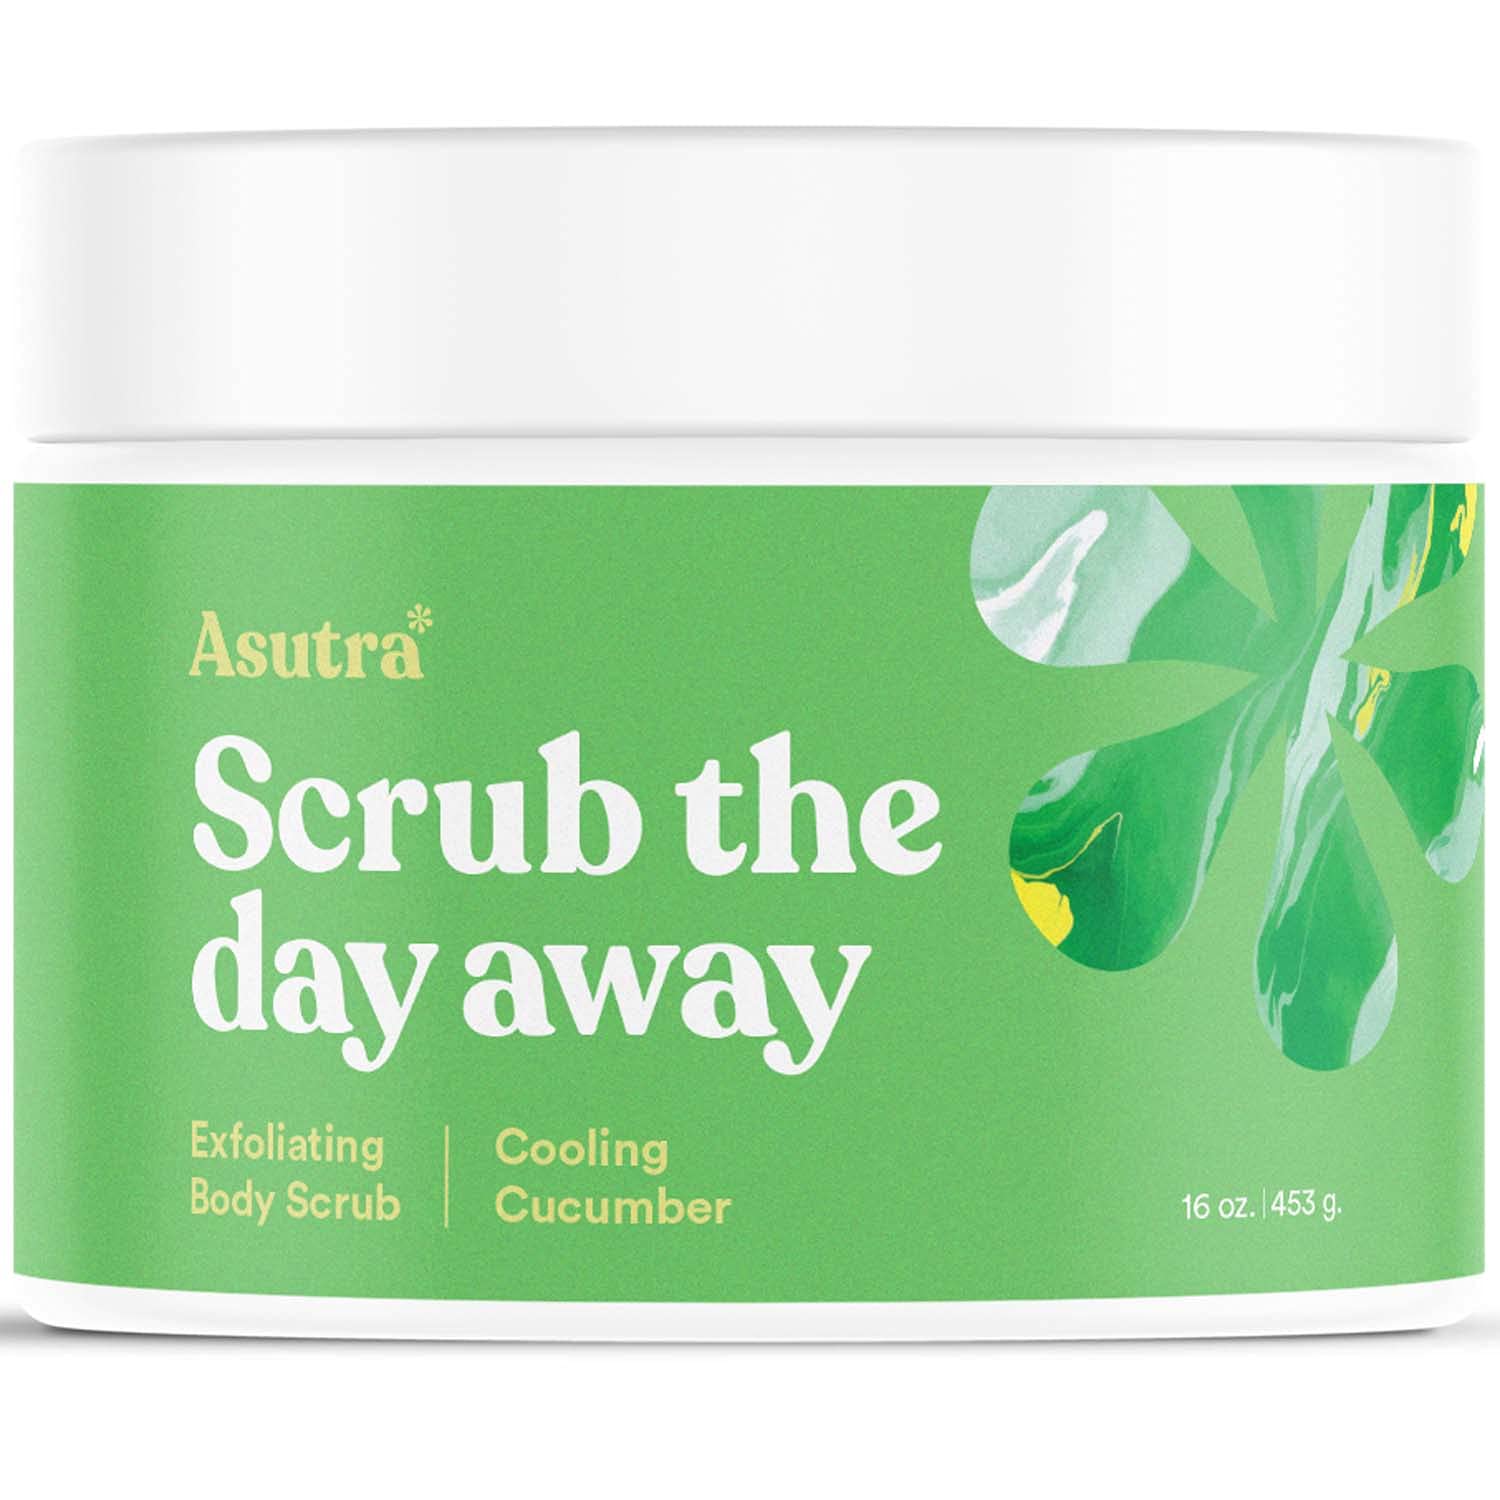 ASUTRA Dead Sea Salt Body Scrub Exfoliator (Cooling Cucumber), NEW BIGGER 16 oz size | Ultra Hydrating, Gentle, & Moisturizing | Coconut, Cucumber, and Peppermint Oils | Includes Wooden Spoon